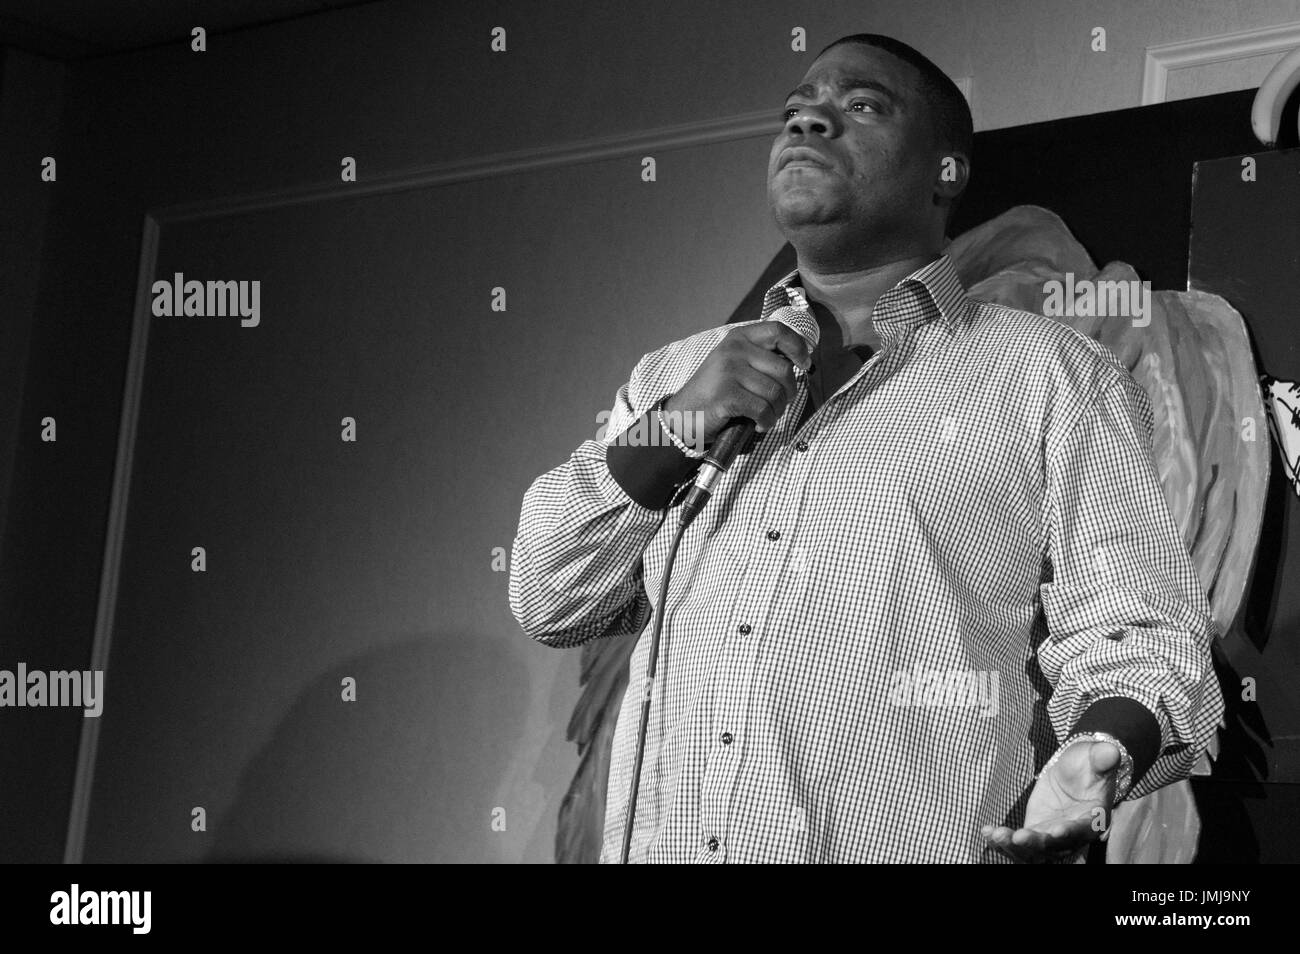 HASBROUCK HEIGHTS, NJ - AUGUST 8:  Tracy Morgan performs stand-up at Bananas Comedy Club in Hasbrouch Heights NJ on August 8, 2013.  Photo: RTPallante / MediaPunch. ***HIGHER RATES APPLY *** Stock Photo